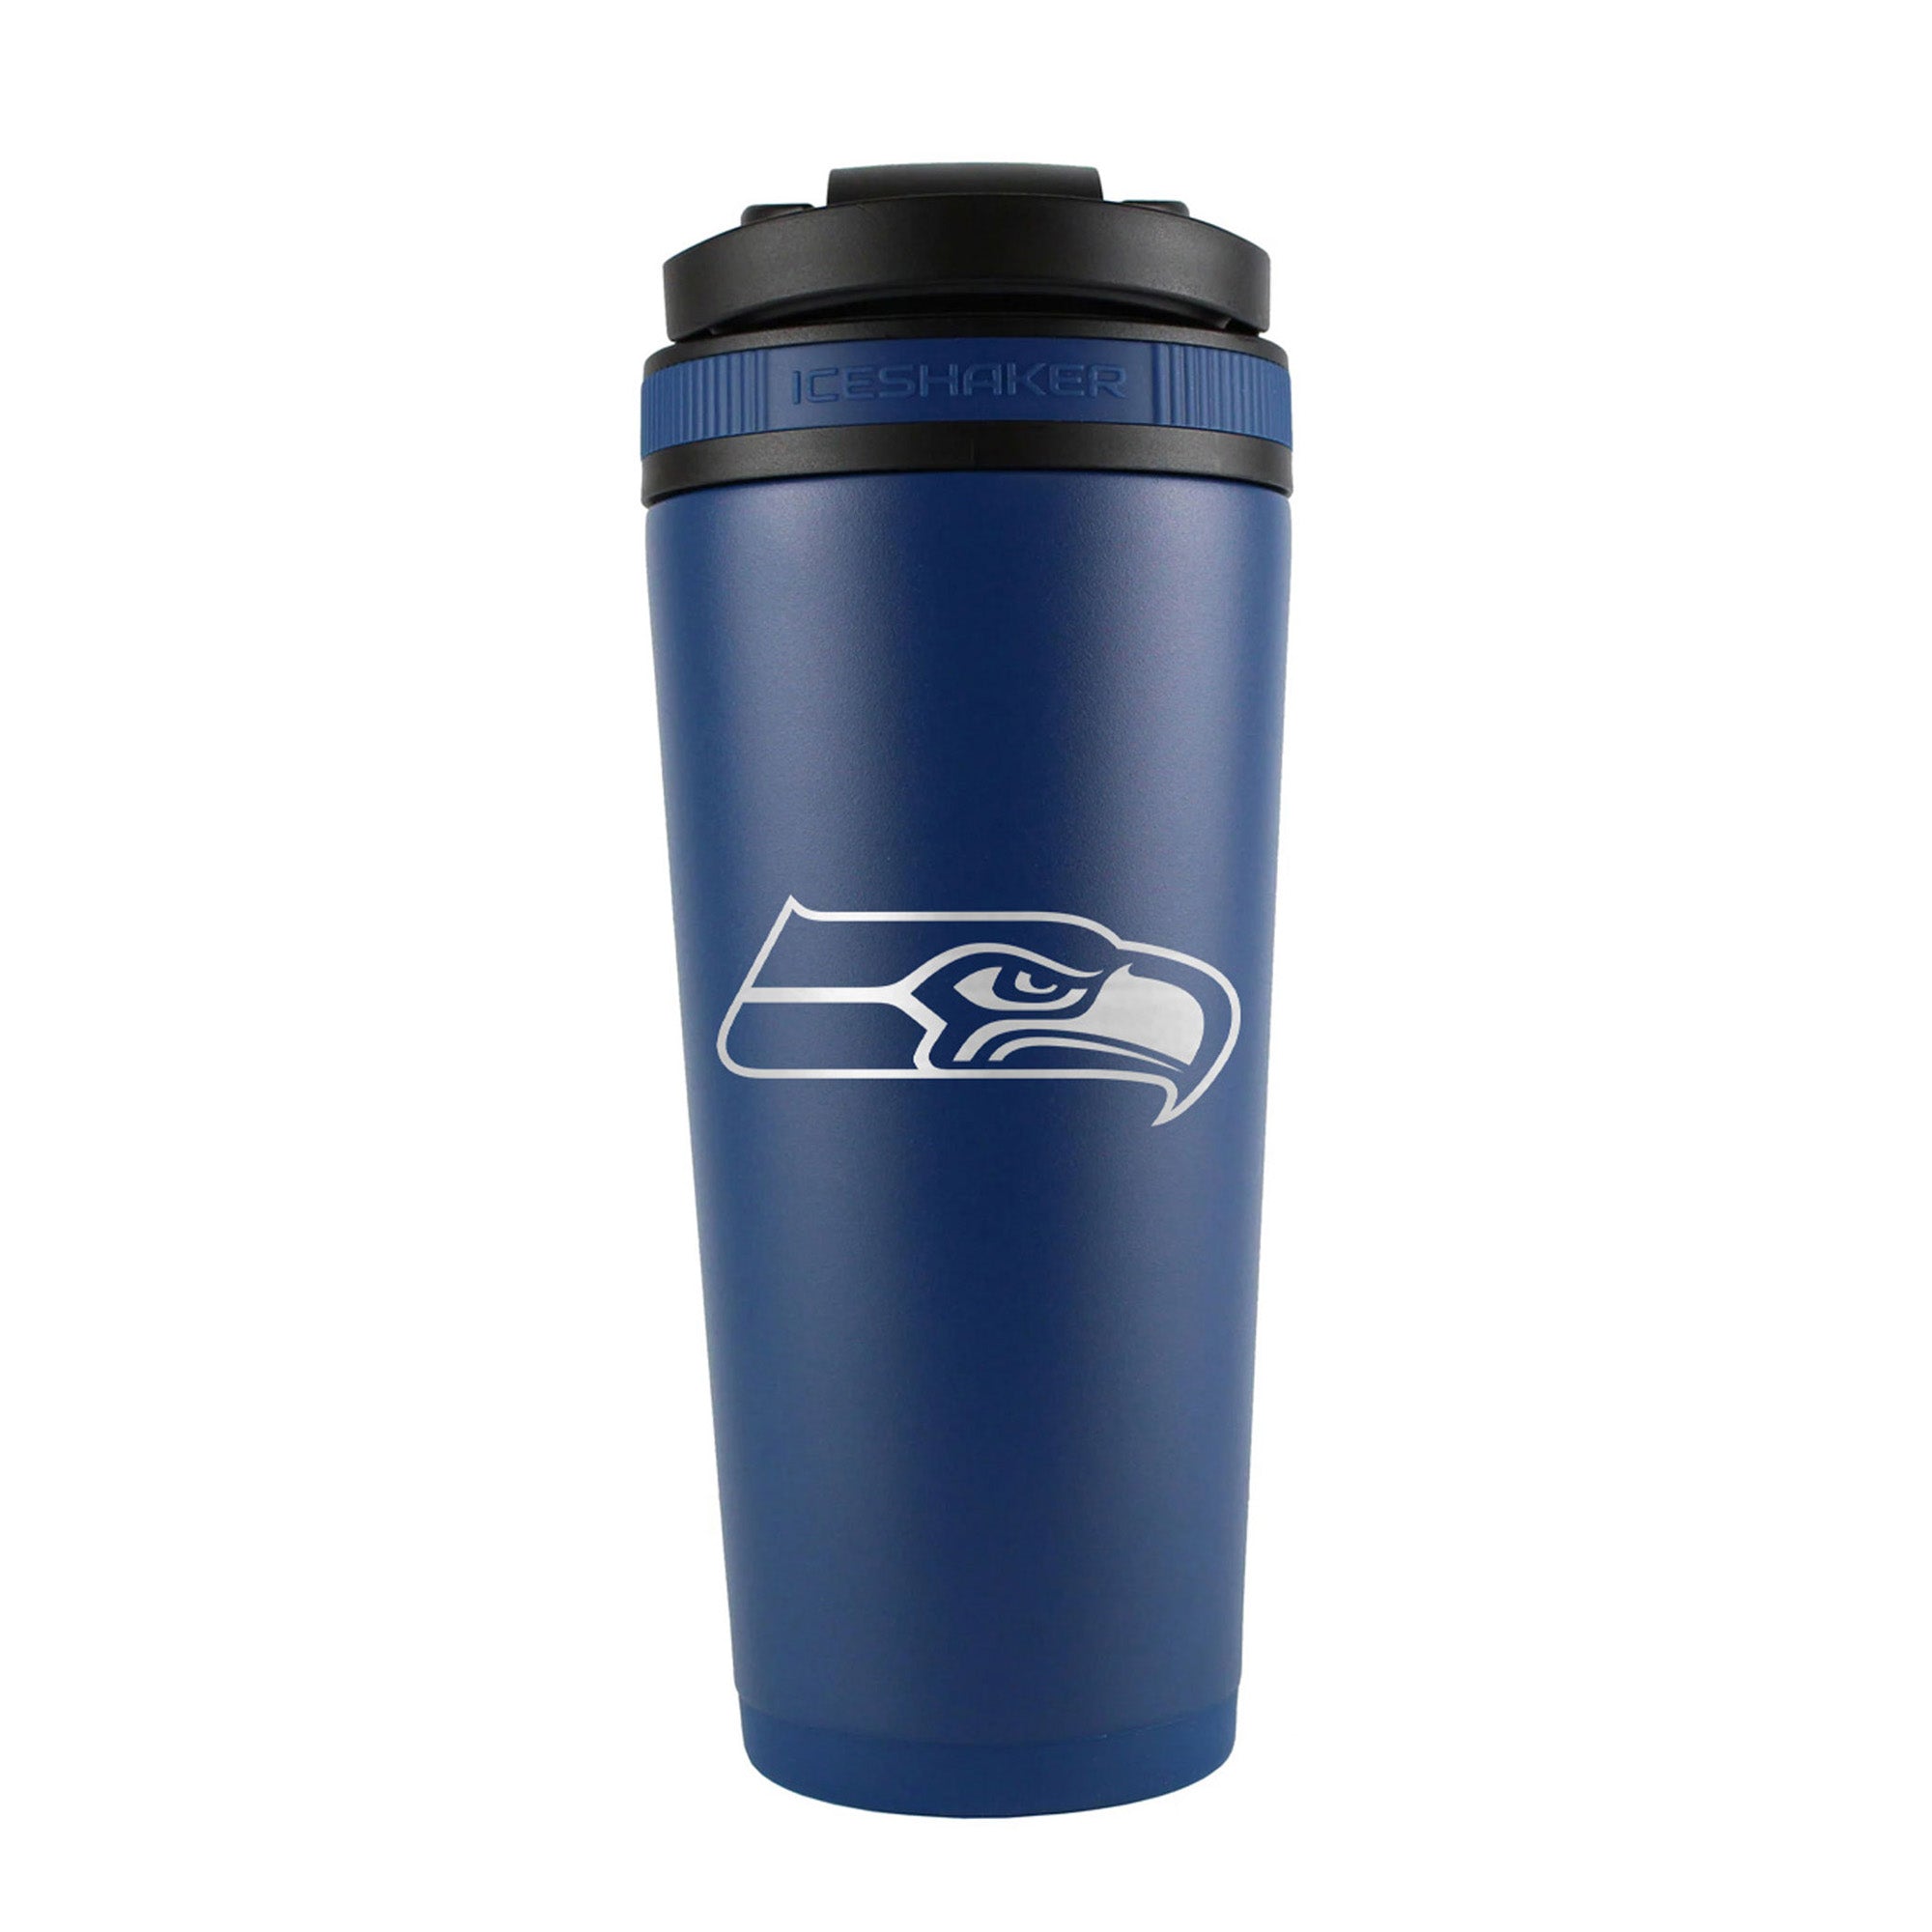 Officially Licensed Seattle Seahawks 26oz Ice Shaker - Navy